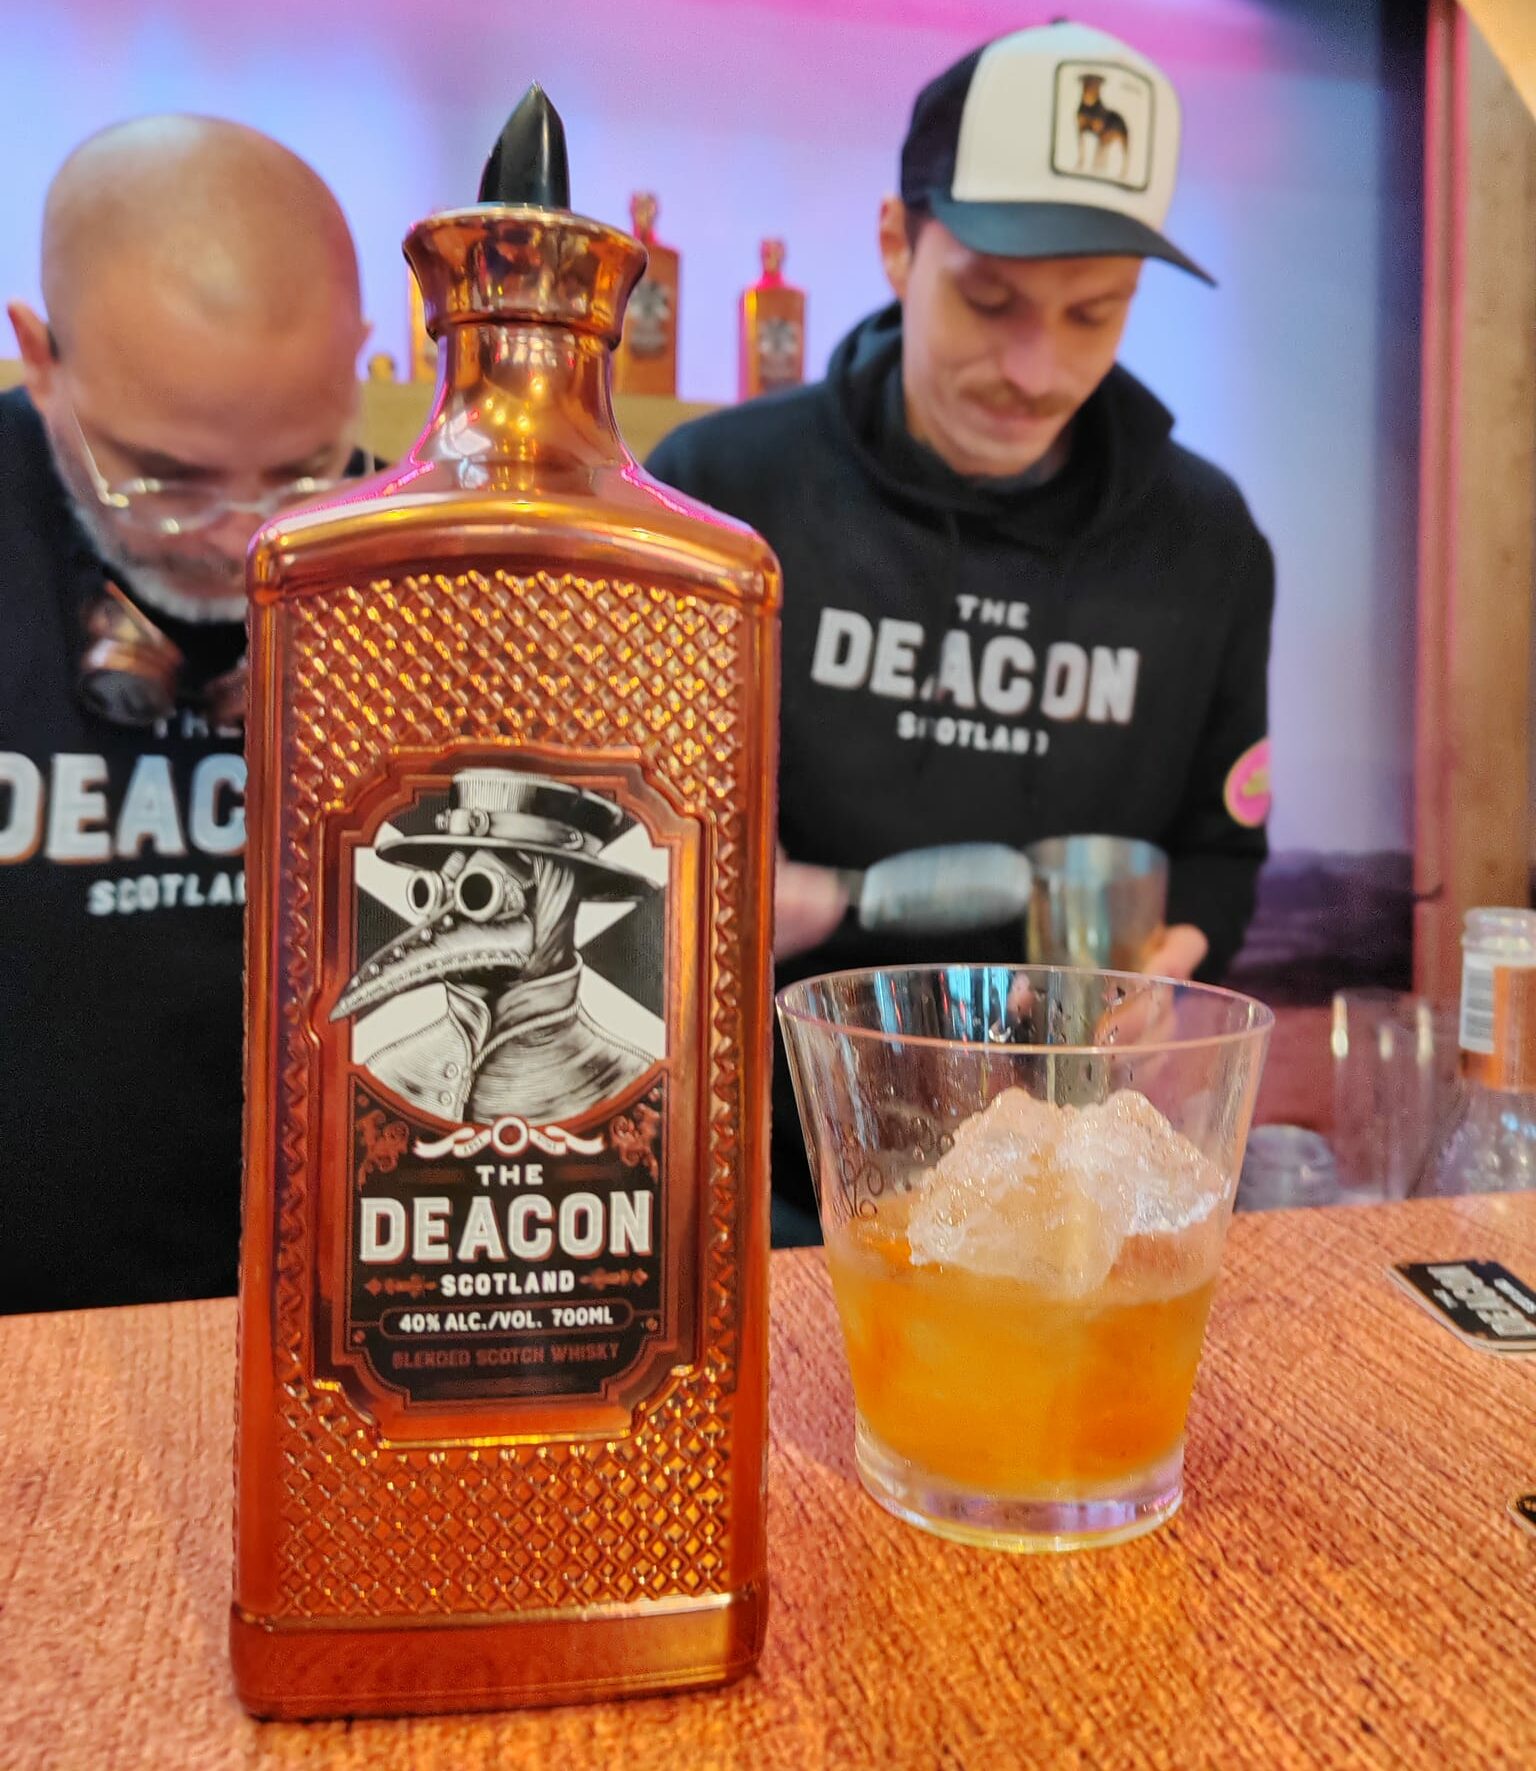 The Deacon (whisky, Pernod Ricard France)